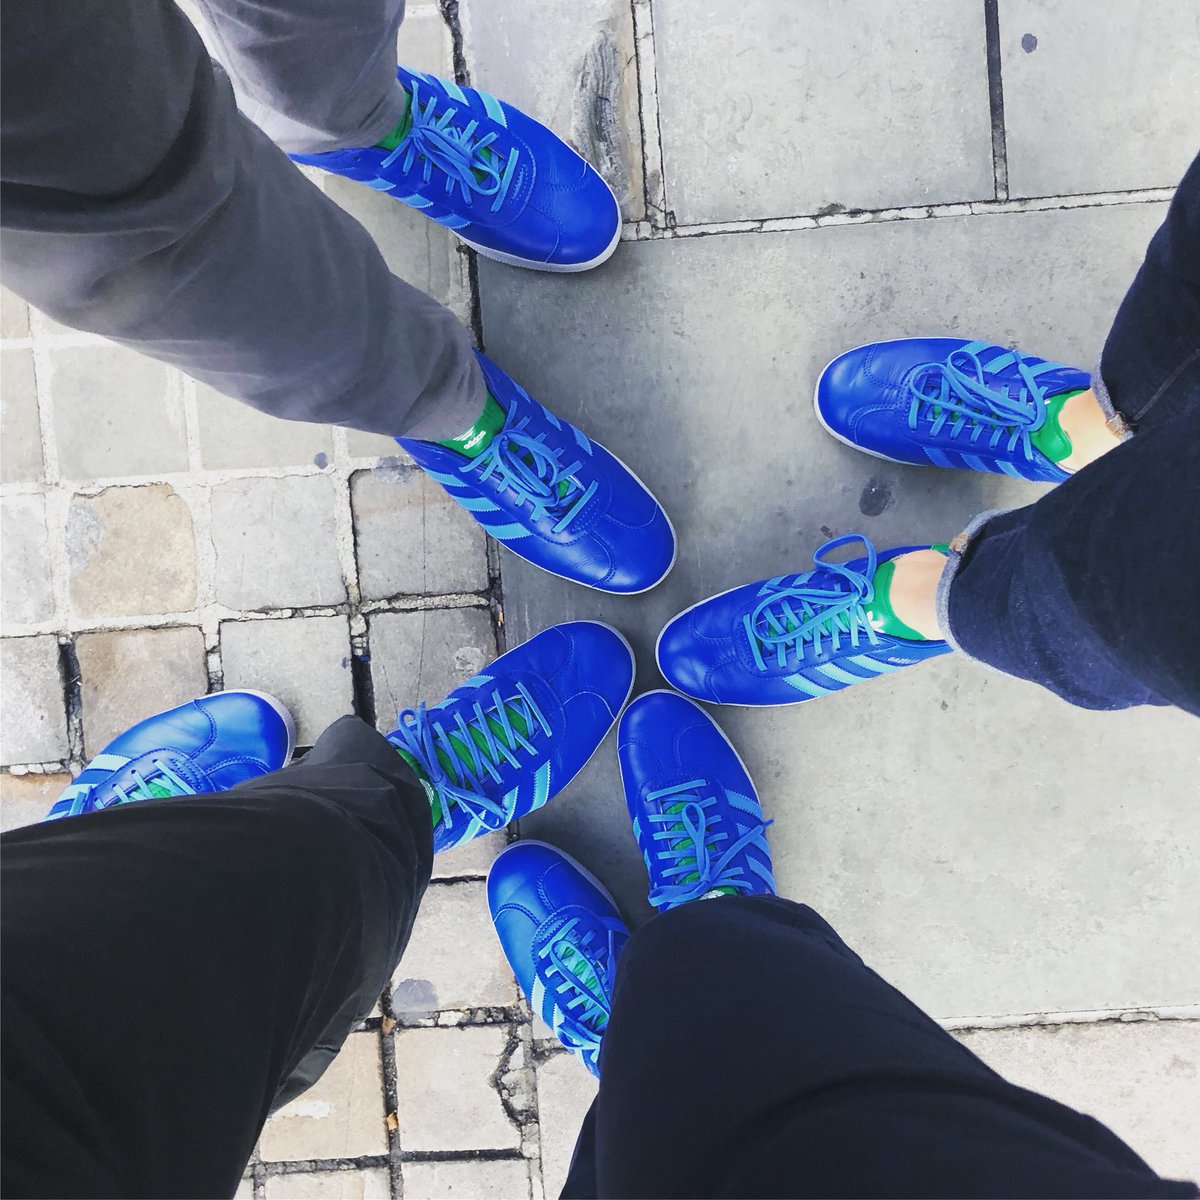 Teamwork makes the dream work at @Travelaer (and a little style too) #AviationFestival #aviationfestival2018 #adidas #adidasOriginals